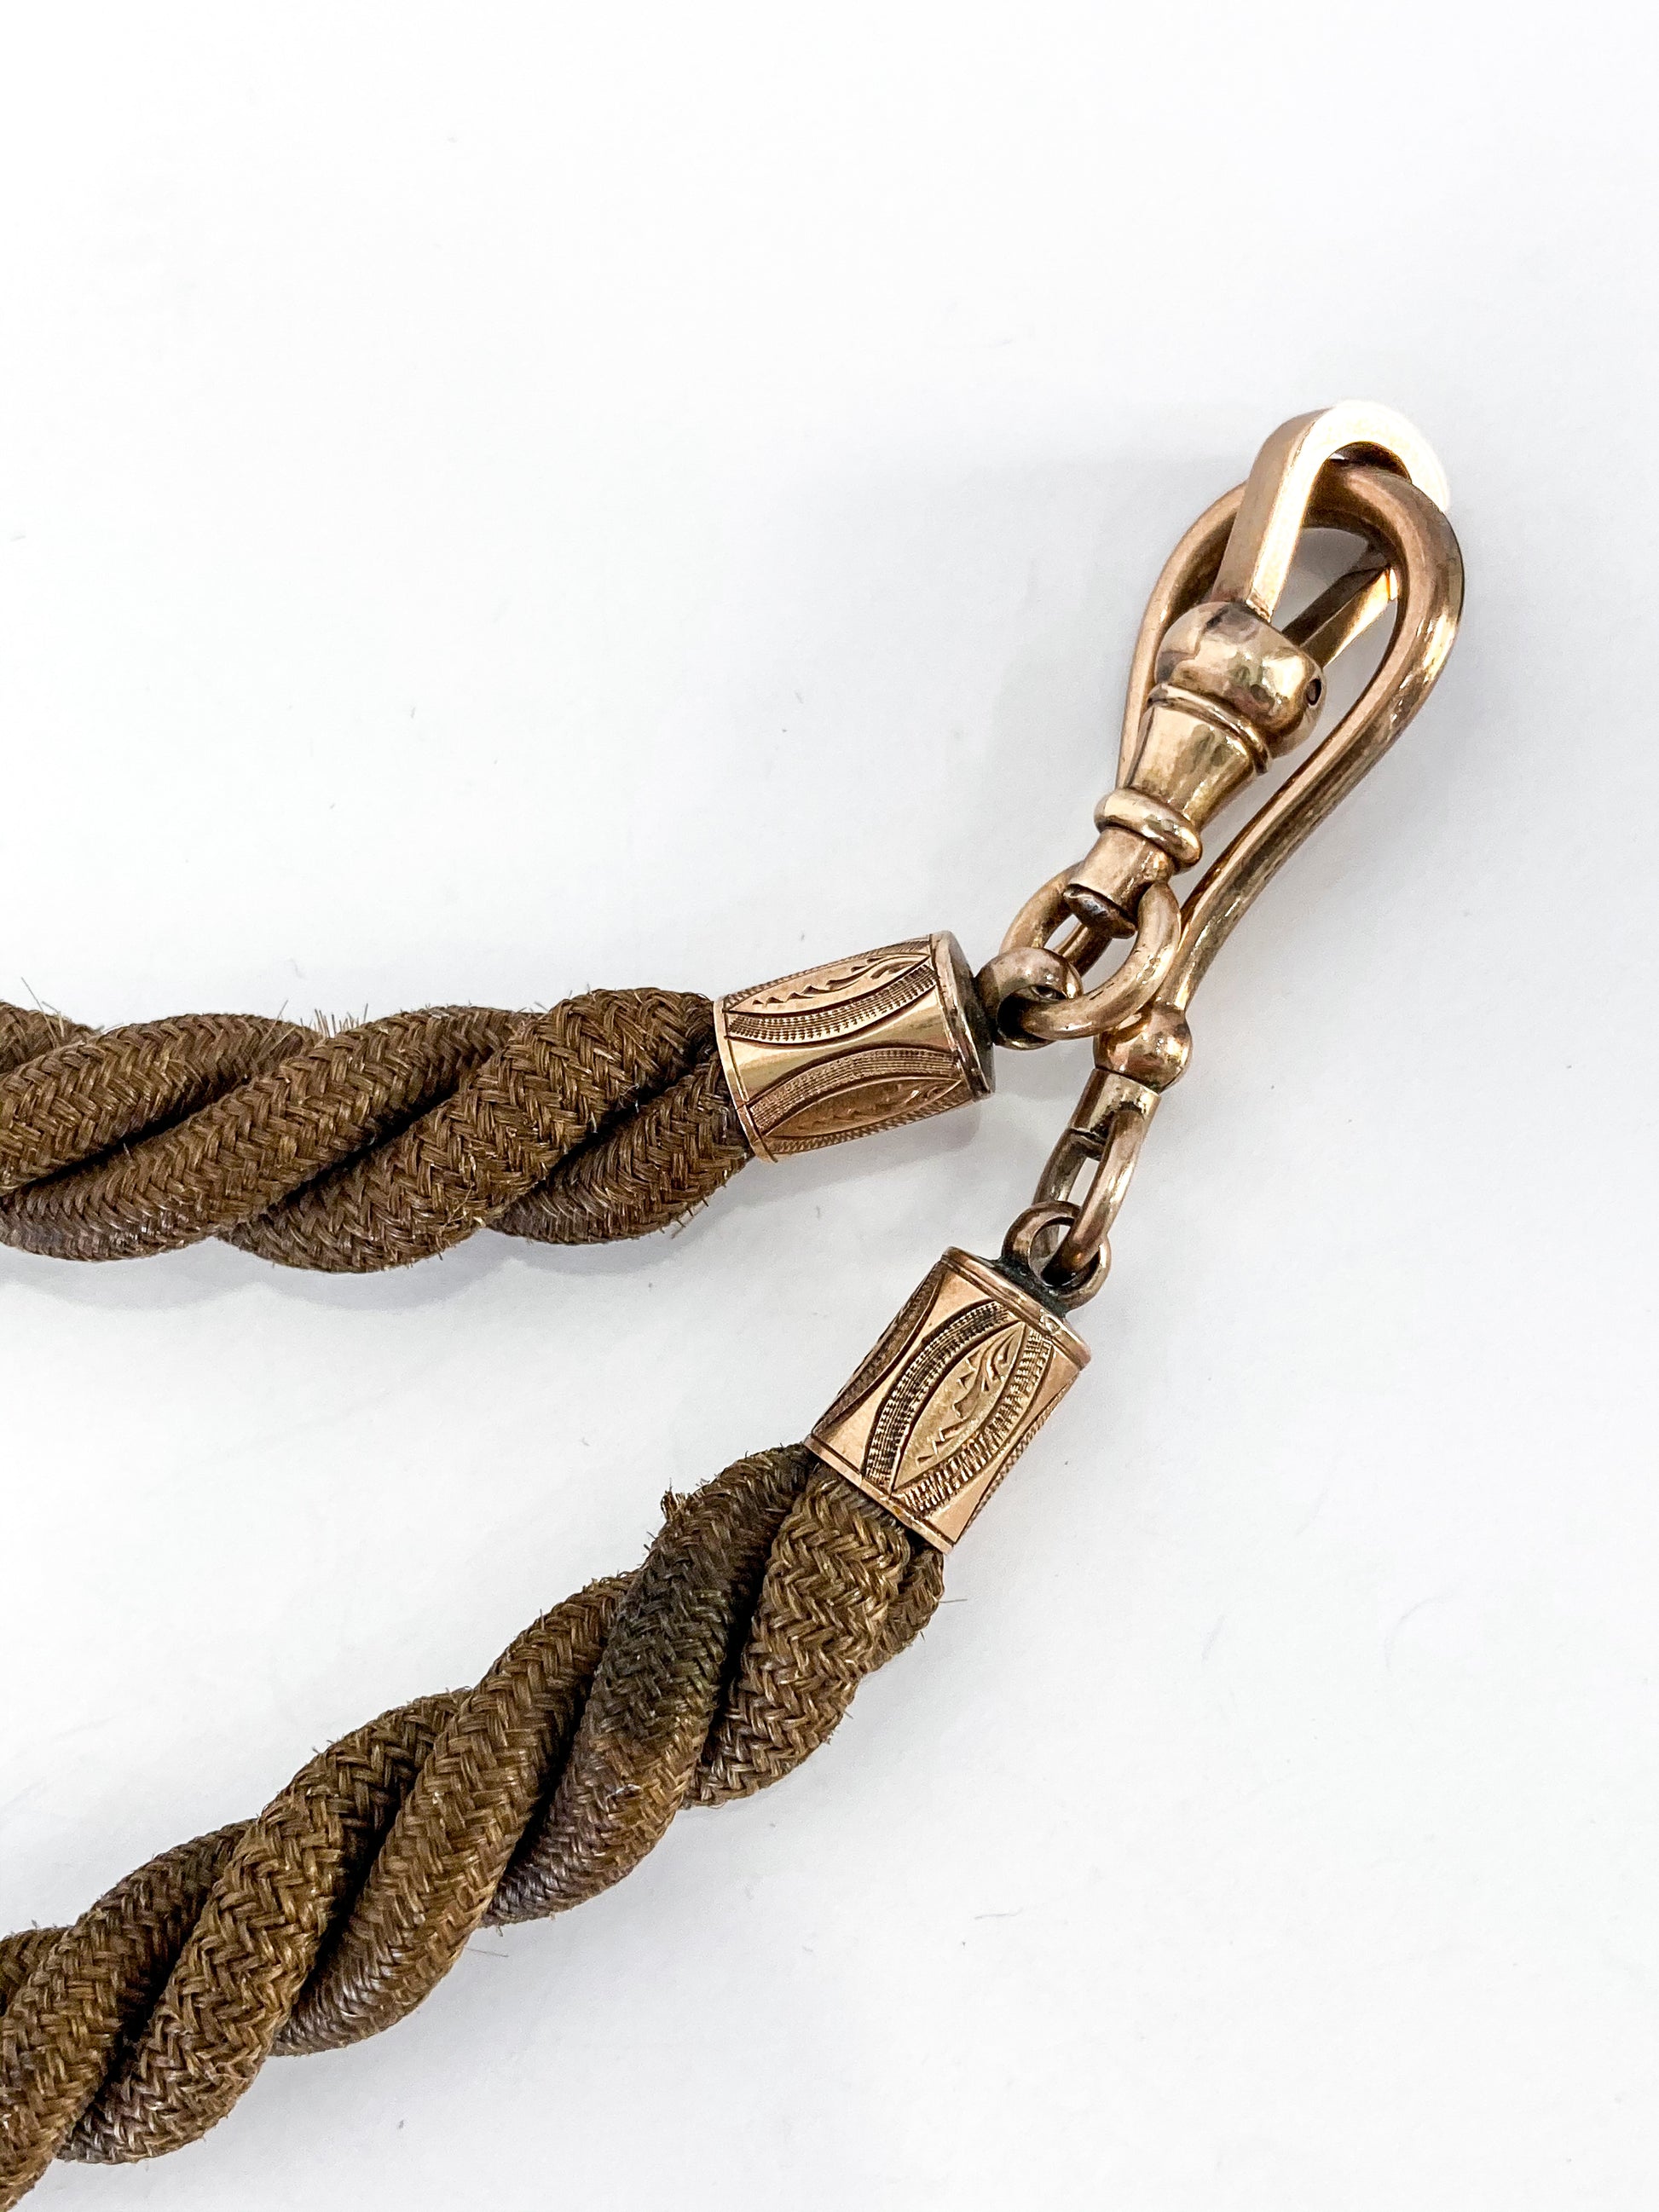 Antique Gold Filled Victorian Hair Braided Mourning Watch Chain Locket Hook and Loop Close Up